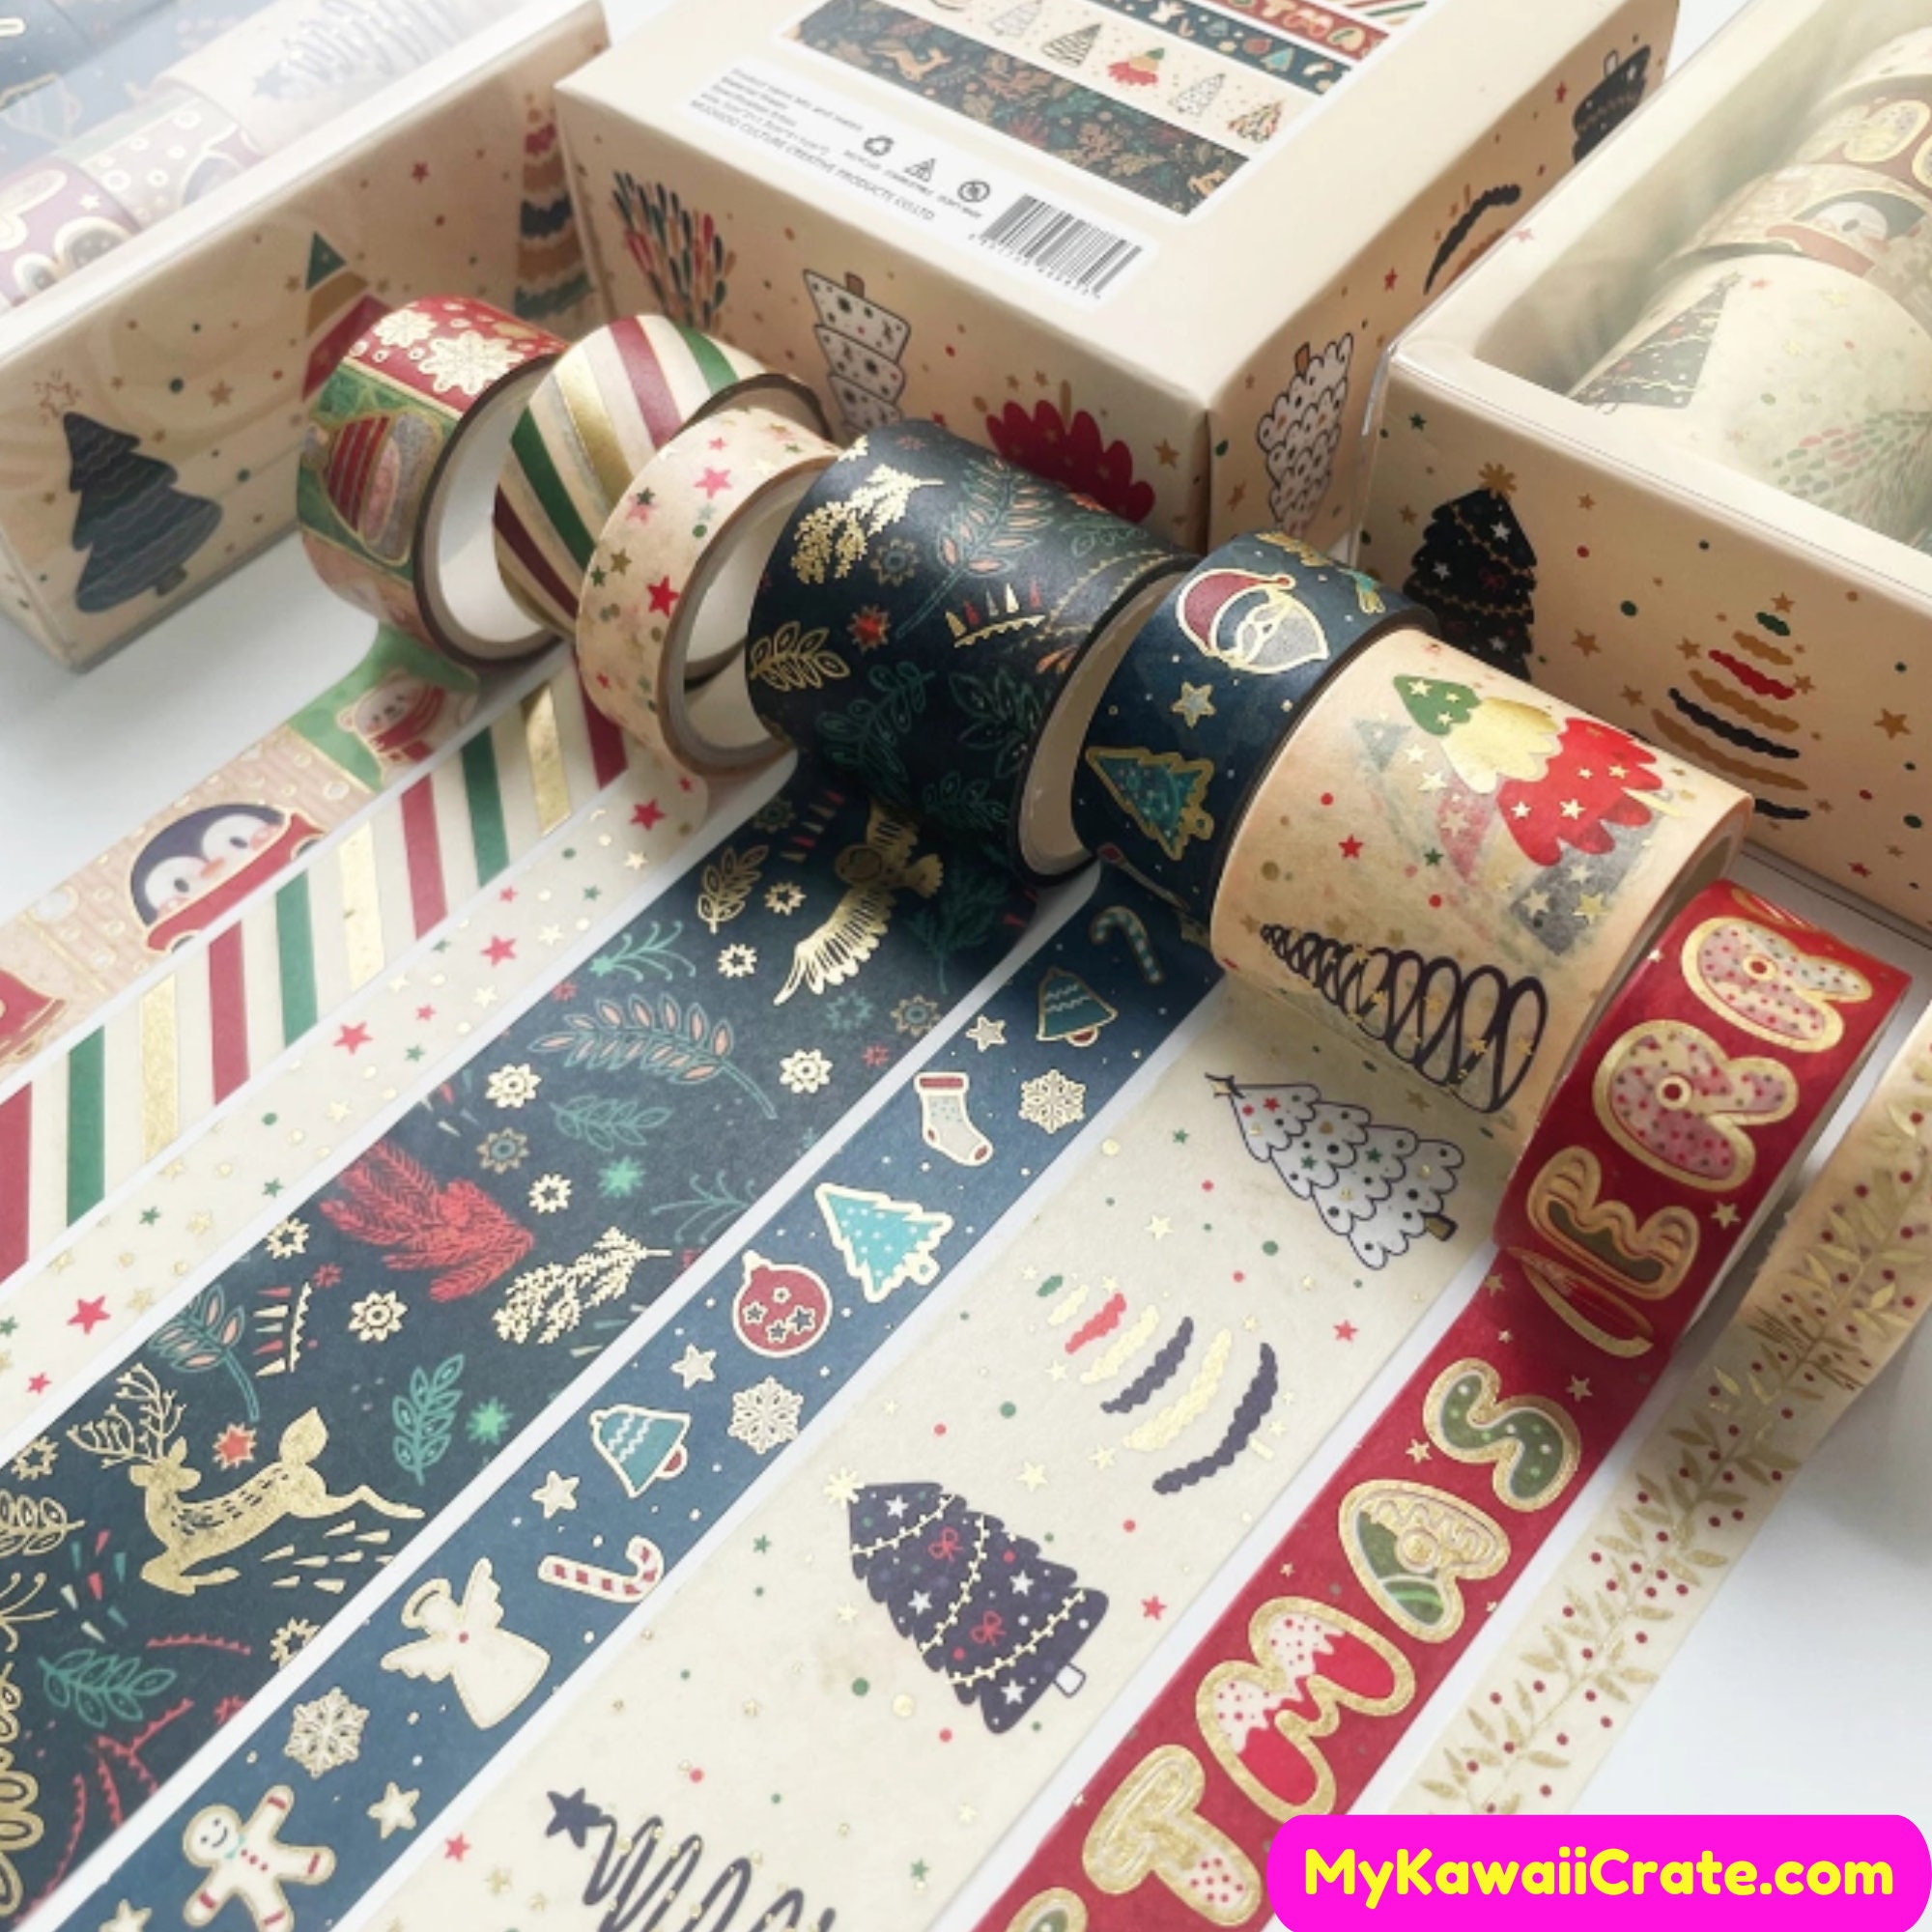 Free shipping,Foil washi tape,Foil Tape,DIY craft Scrapbooking tape,Scrapbook  Diary craft,Many Coupons